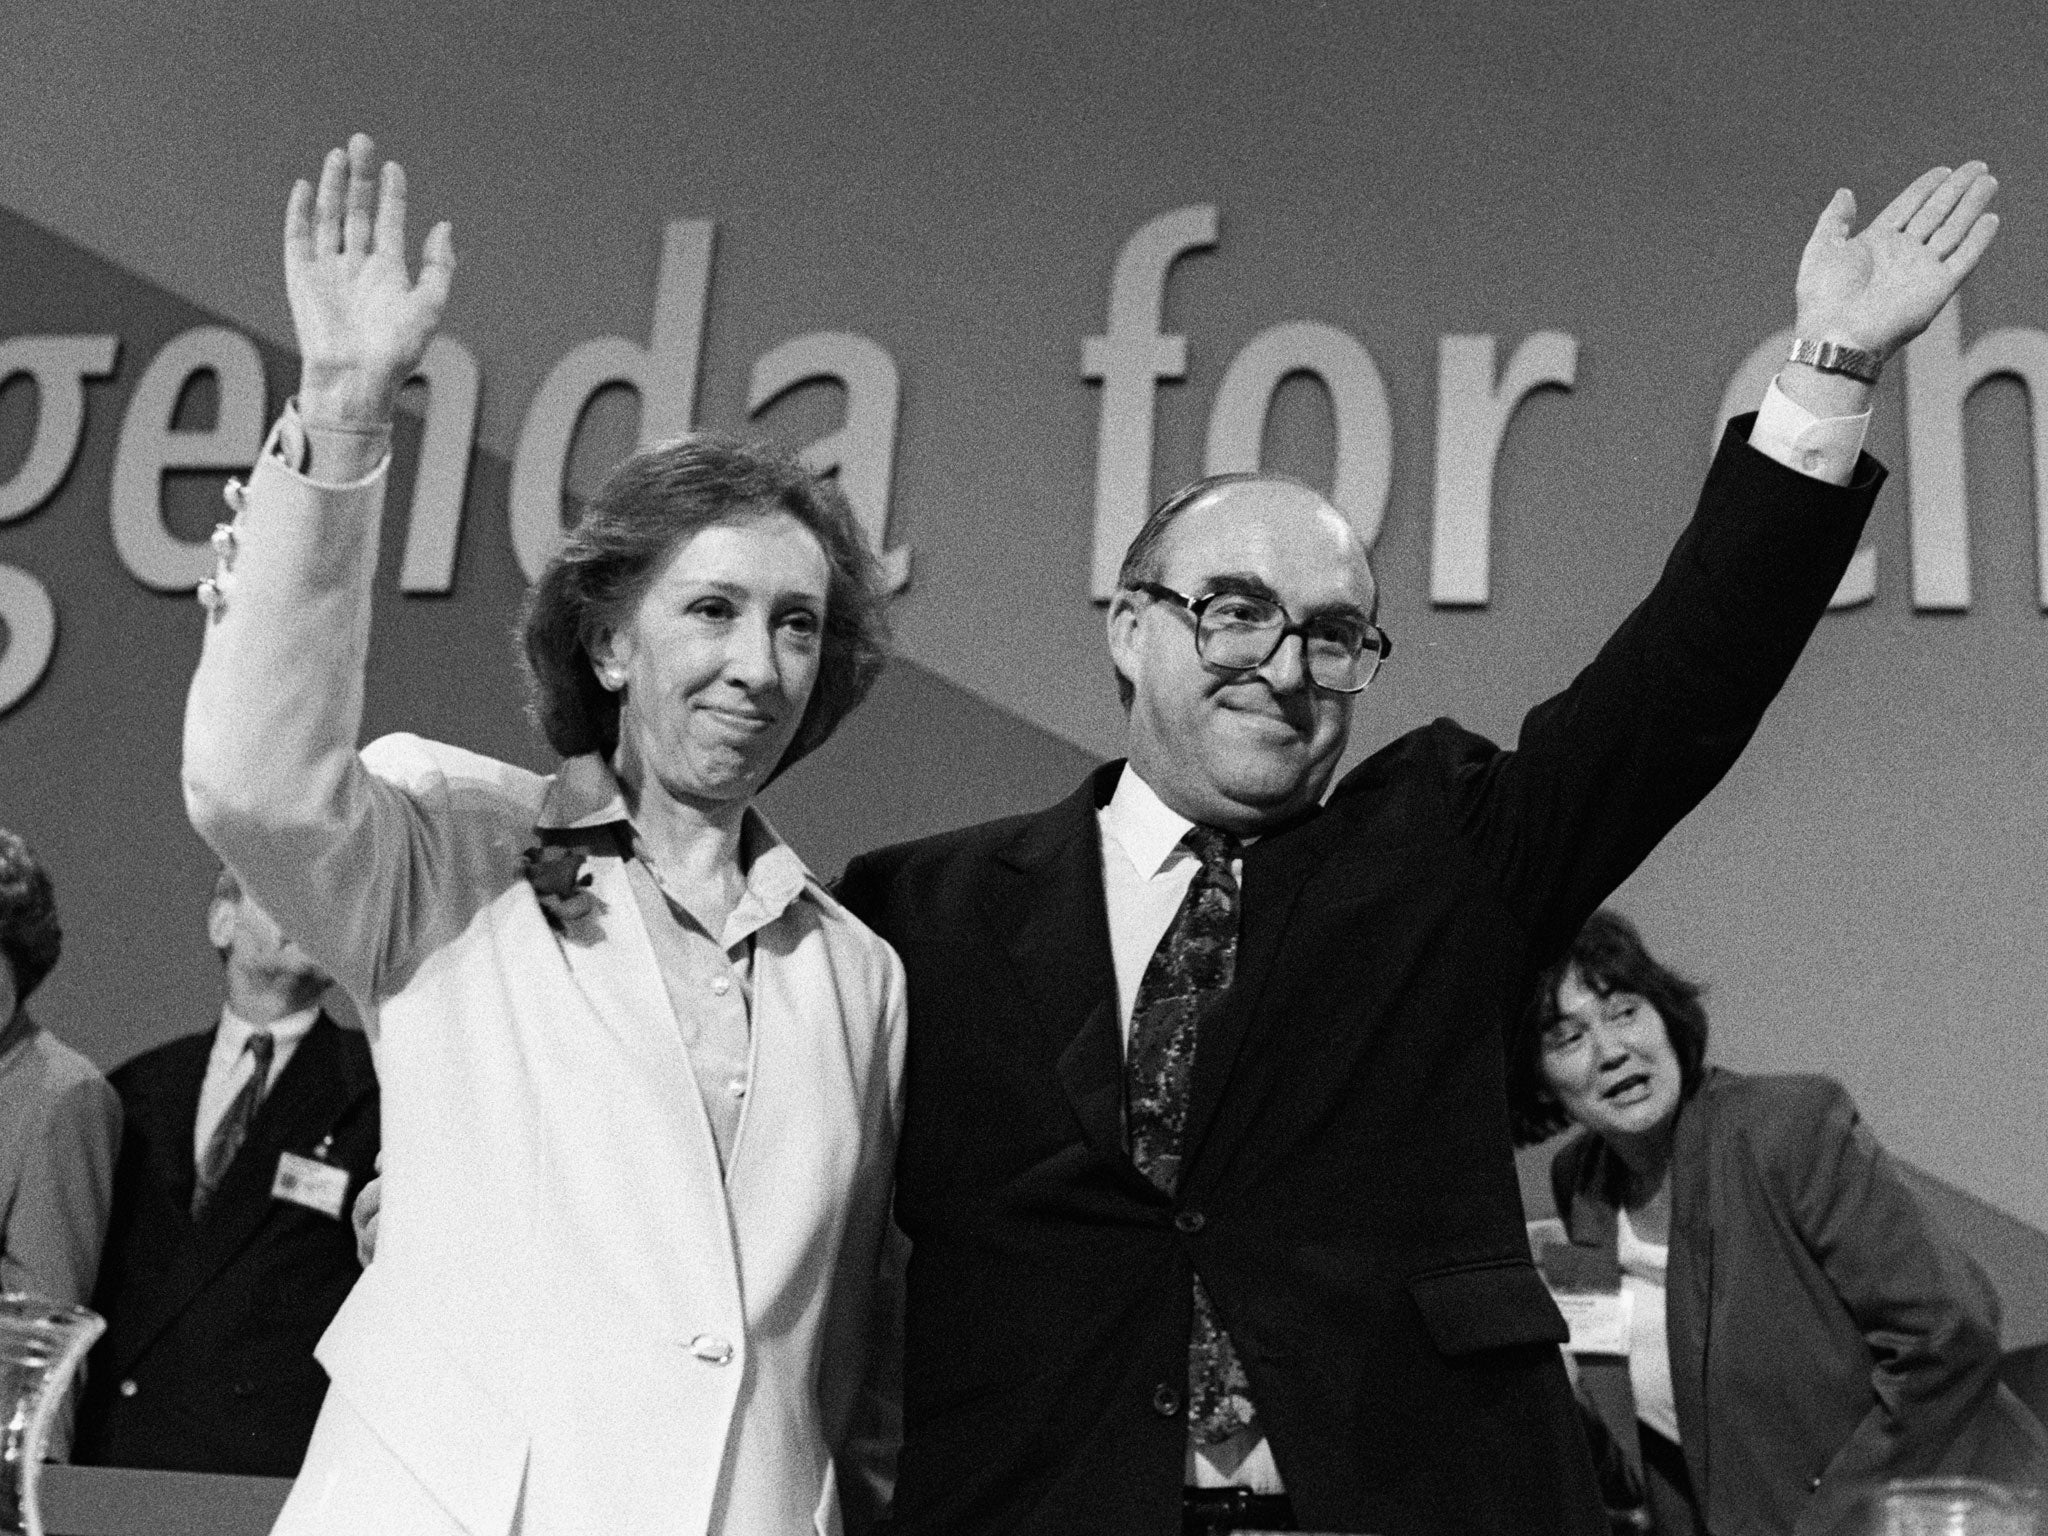 A Life in Focus: John Smith, Labour Party leader, 1992 to 1994, The  Independent